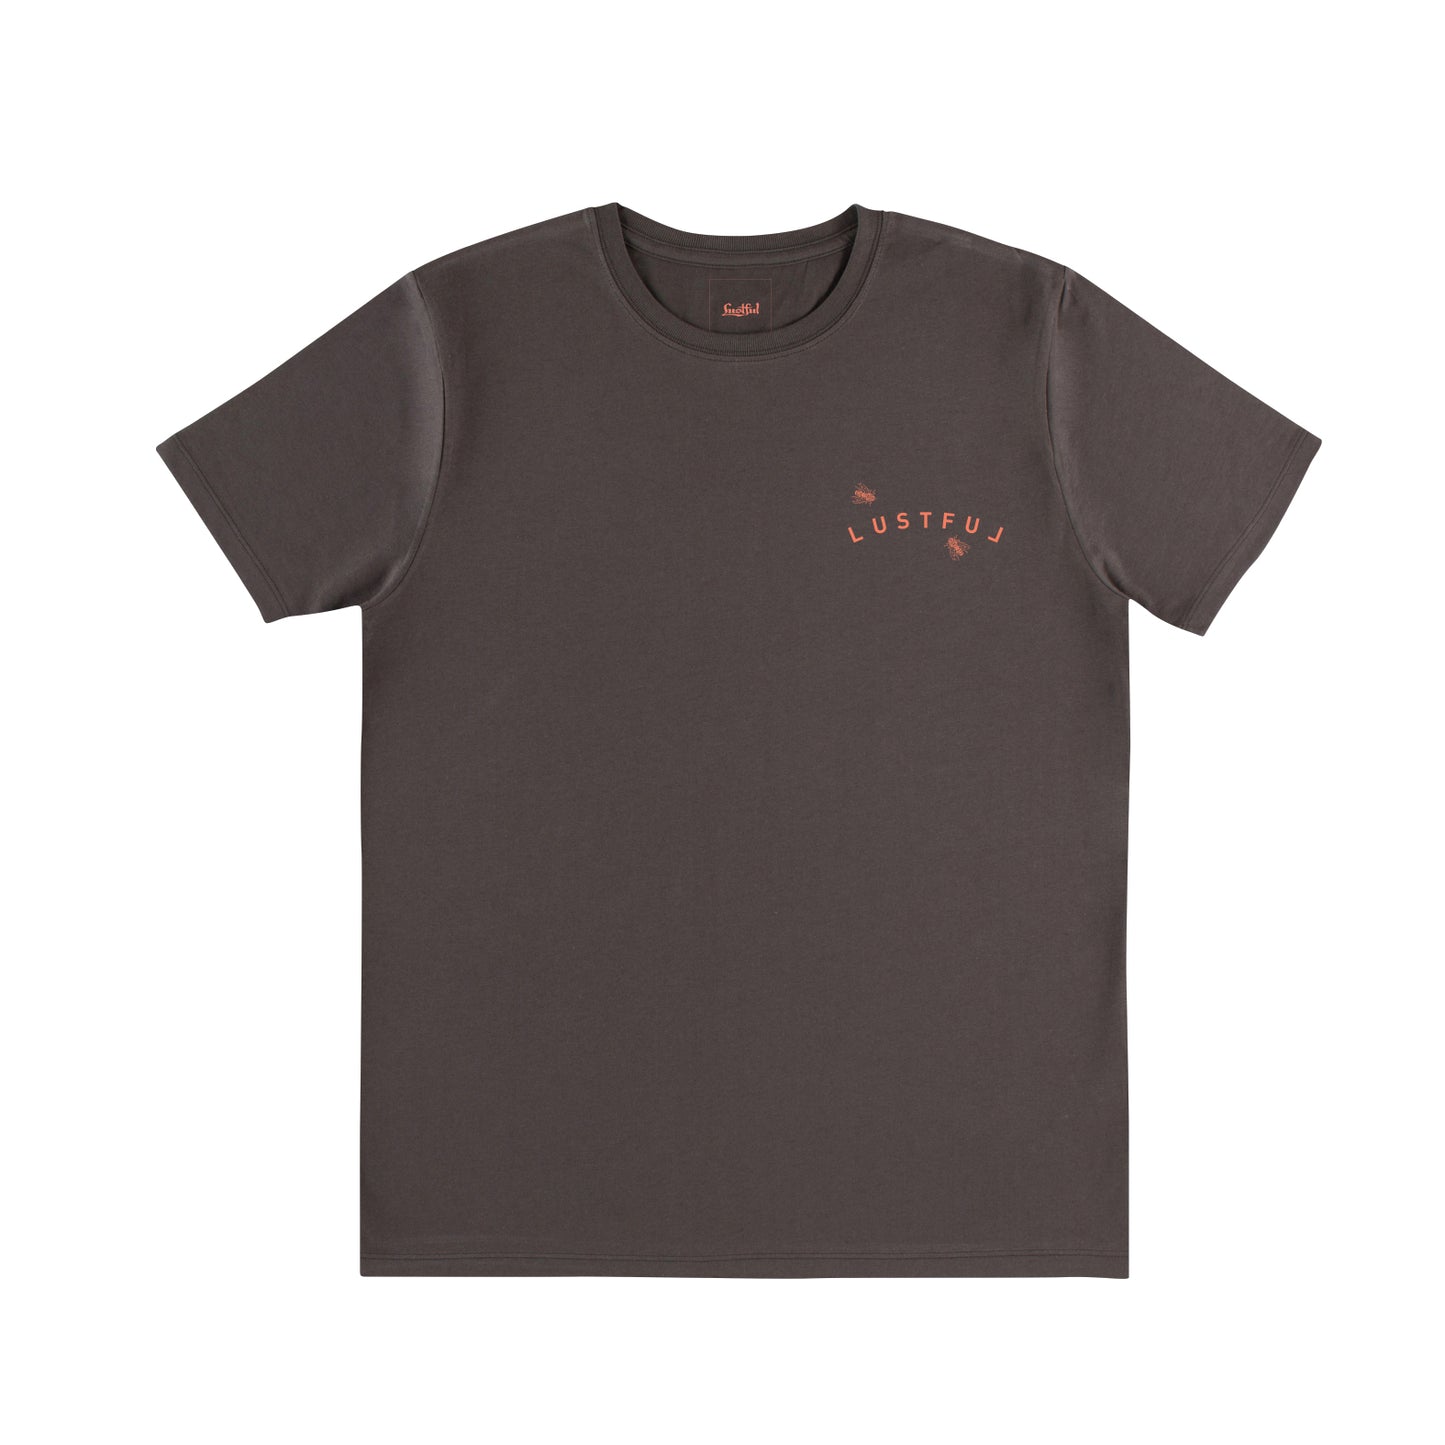 Bug t-shirt in charcoal